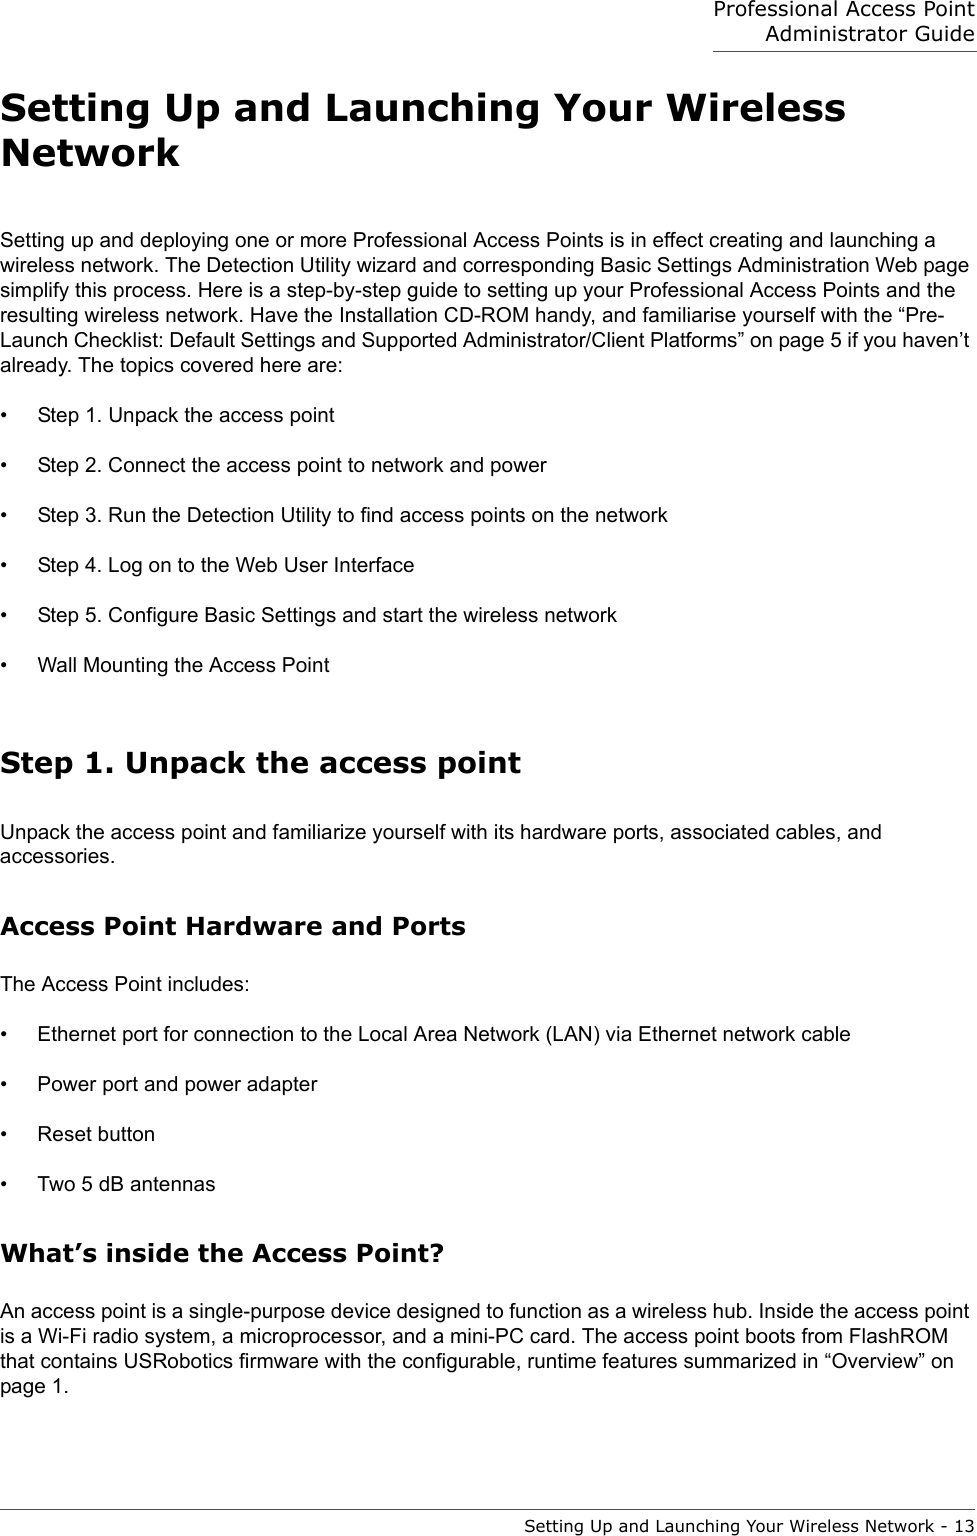 Professional Access Point Administrator GuideSetting Up and Launching Your Wireless Network - 13Setting Up and Launching Your Wireless NetworkSetting up and deploying one or more Professional Access Points is in effect creating and launching a wireless network. The Detection Utility wizard and corresponding Basic Settings Administration Web page simplify this process. Here is a step-by-step guide to setting up your Professional Access Points and the resulting wireless network. Have the Installation CD-ROM handy, and familiarise yourself with the “Pre-Launch Checklist: Default Settings and Supported Administrator/Client Platforms” on page 5 if you haven’t already. The topics covered here are:•Step 1. Unpack the access point•Step 2. Connect the access point to network and power•Step 3. Run the Detection Utility to find access points on the network•Step 4. Log on to the Web User Interface•Step 5. Configure Basic Settings and start the wireless network•Wall Mounting the Access PointStep 1. Unpack the access pointUnpack the access point and familiarize yourself with its hardware ports, associated cables, and accessories.Access Point Hardware and PortsThe Access Point includes:• Ethernet port for connection to the Local Area Network (LAN) via Ethernet network cable• Power port and power adapter• Reset button• Two 5 dB antennasWhat’s inside the Access Point?An access point is a single-purpose device designed to function as a wireless hub. Inside the access point is a Wi-Fi radio system, a microprocessor, and a mini-PC card. The access point boots from FlashROM that contains USRobotics firmware with the configurable, runtime features summarized in “Overview” on page 1.